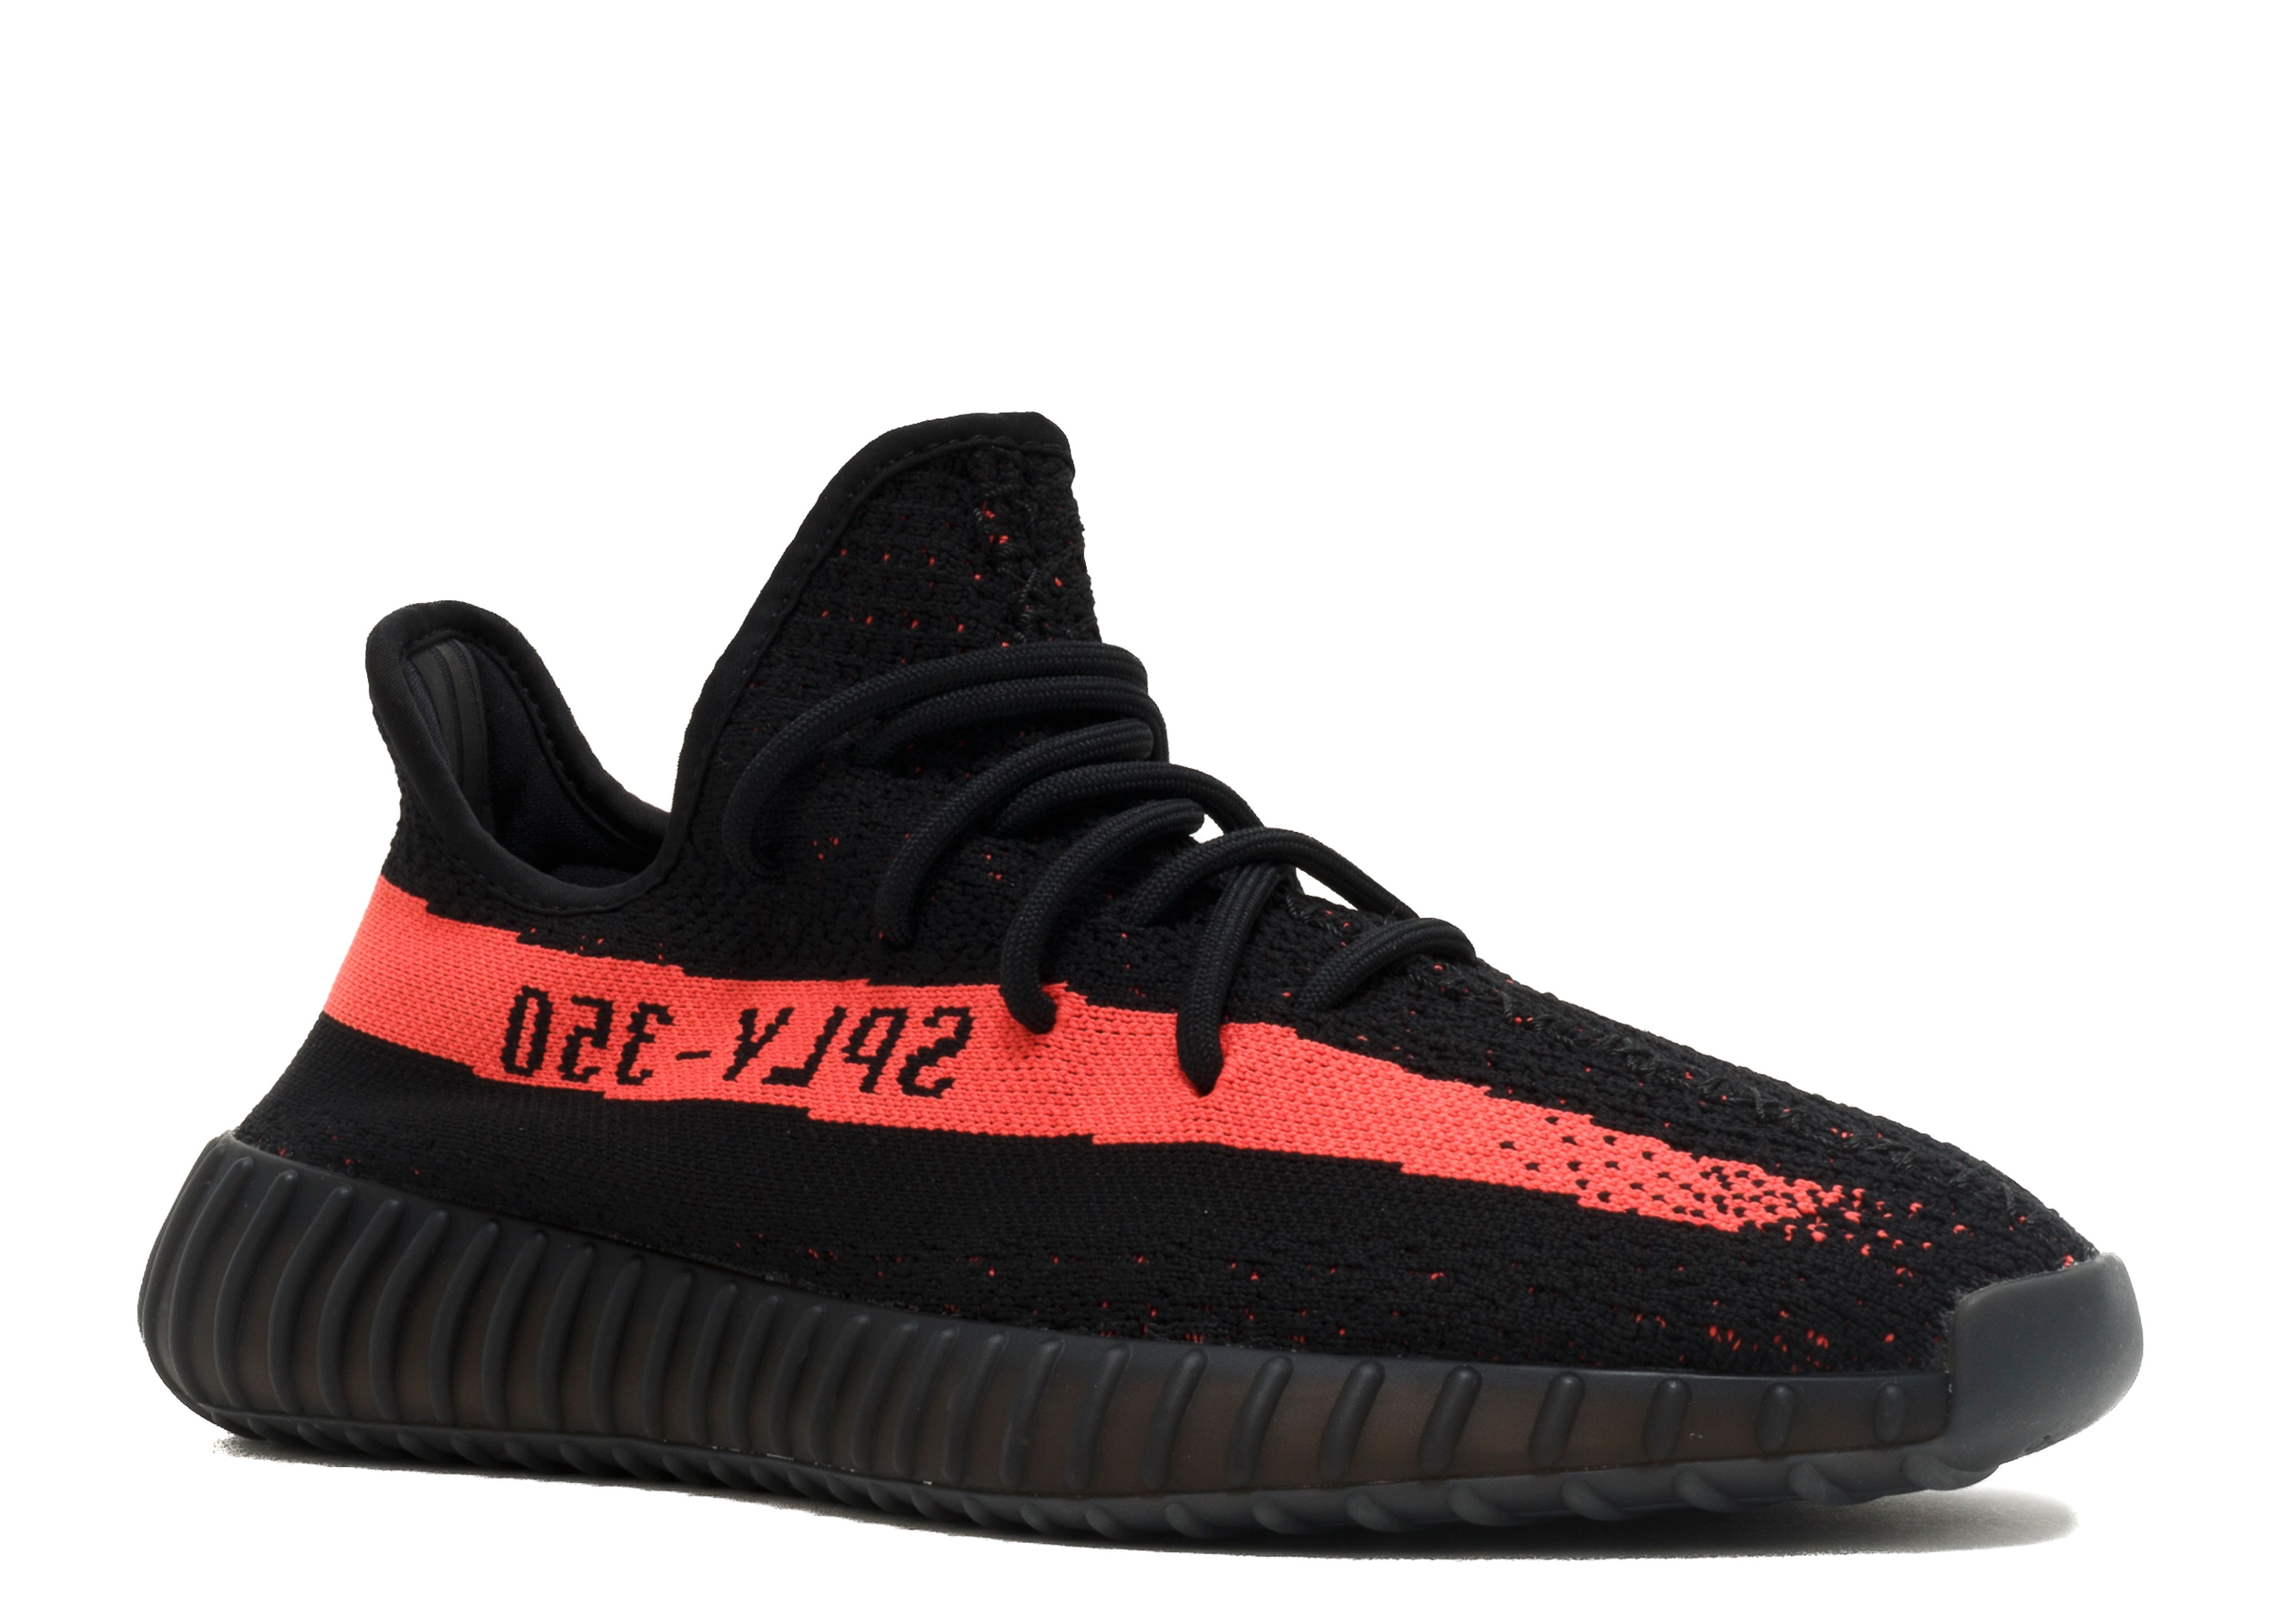 Adidas Yeezy 350 v2 Boost Core Black Green 328014 from firesole.cn